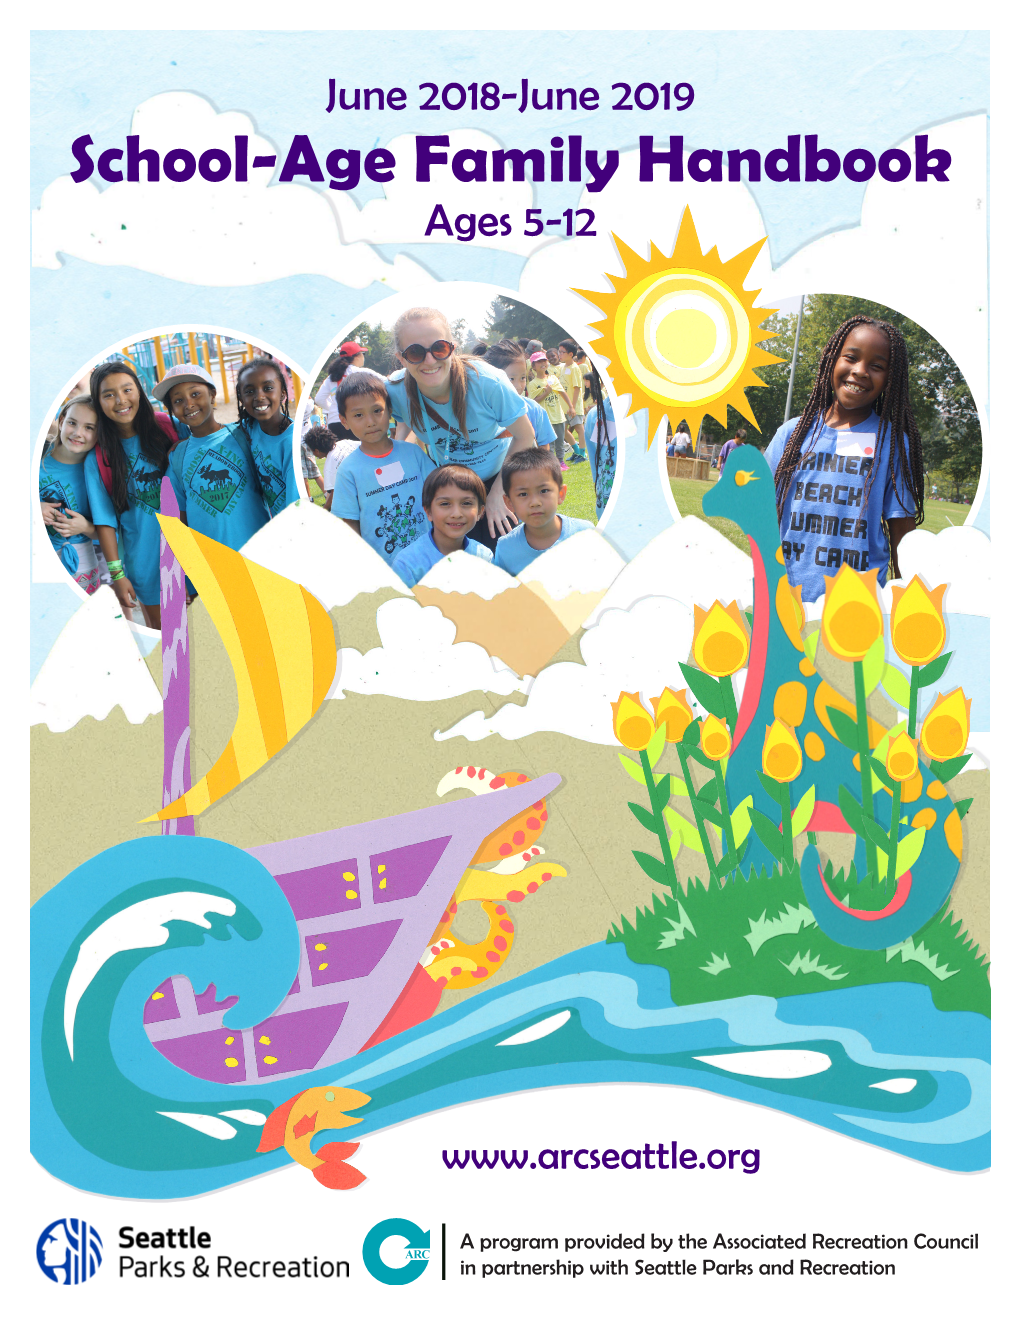 School-Age Family Handbook Ages 5-12